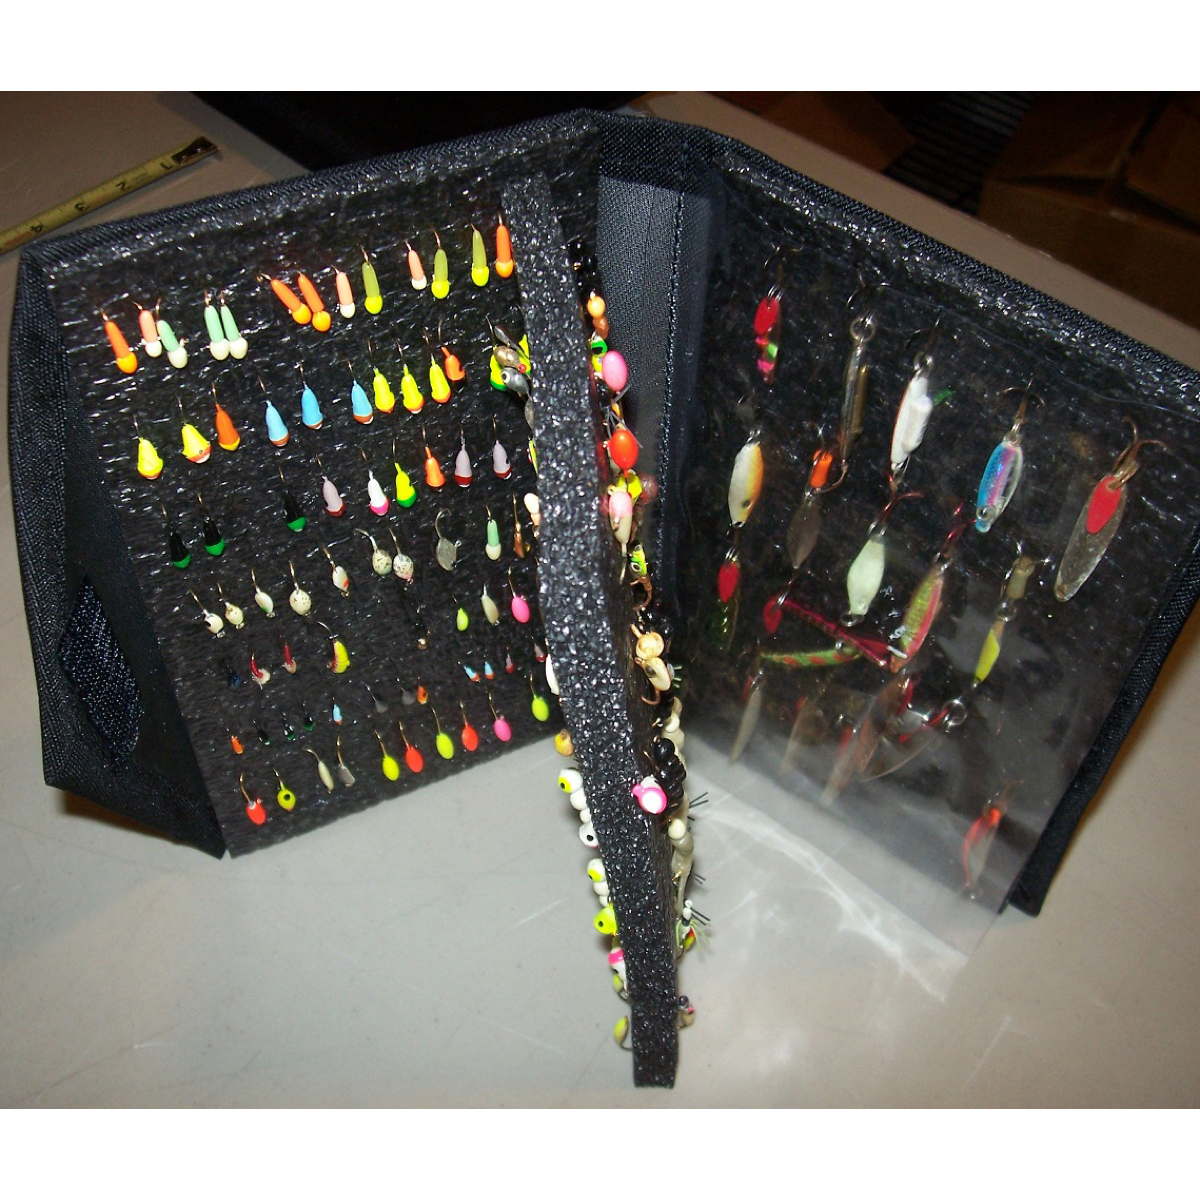 Photo of Kittrick Amish Ice Jig File with insert for sale at United Tackle Shops.